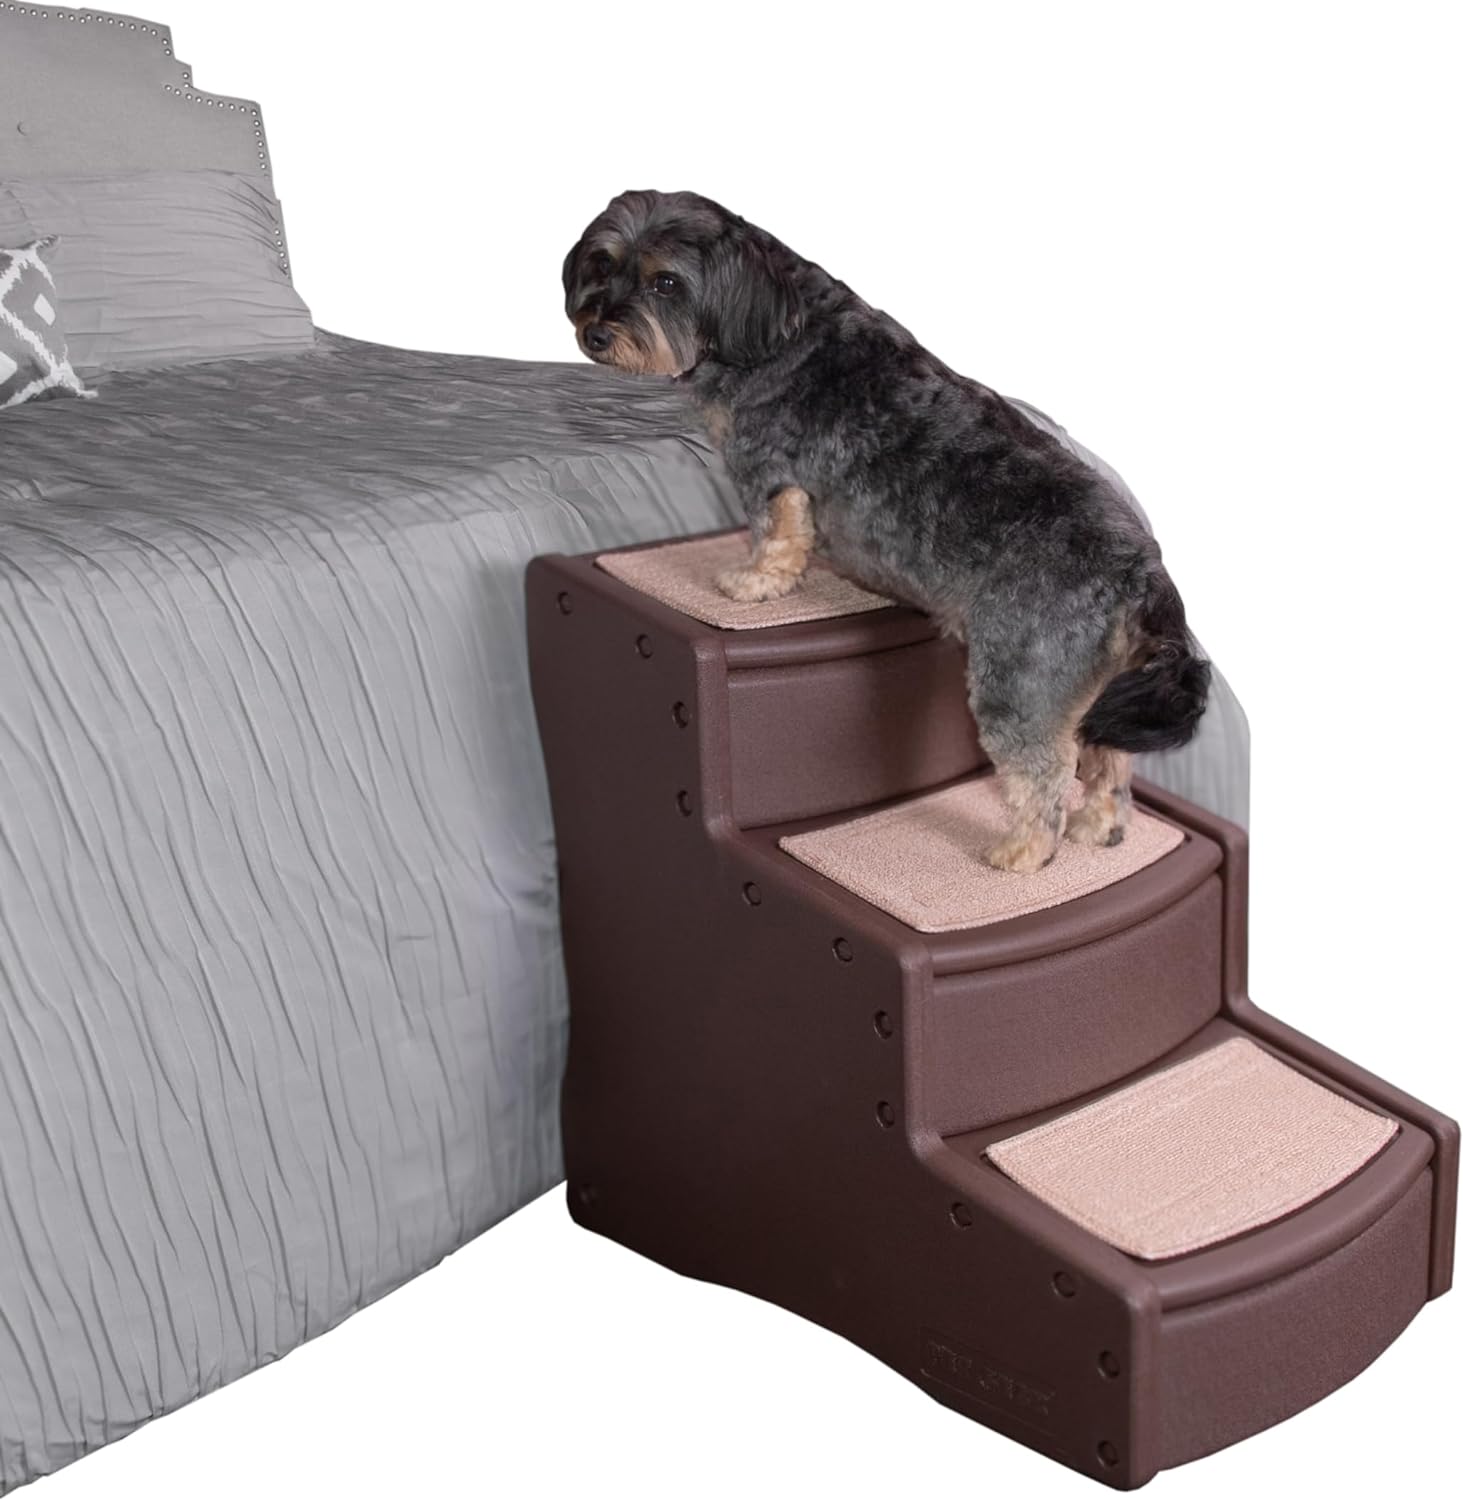 Pet Gear Easy Step III Pet Stairs, 3 Step for Cats\/Dogs, Removable Washable Carpet Treads, for Pets Up to 150lbs, No Tools Required, Available in 6 Colors